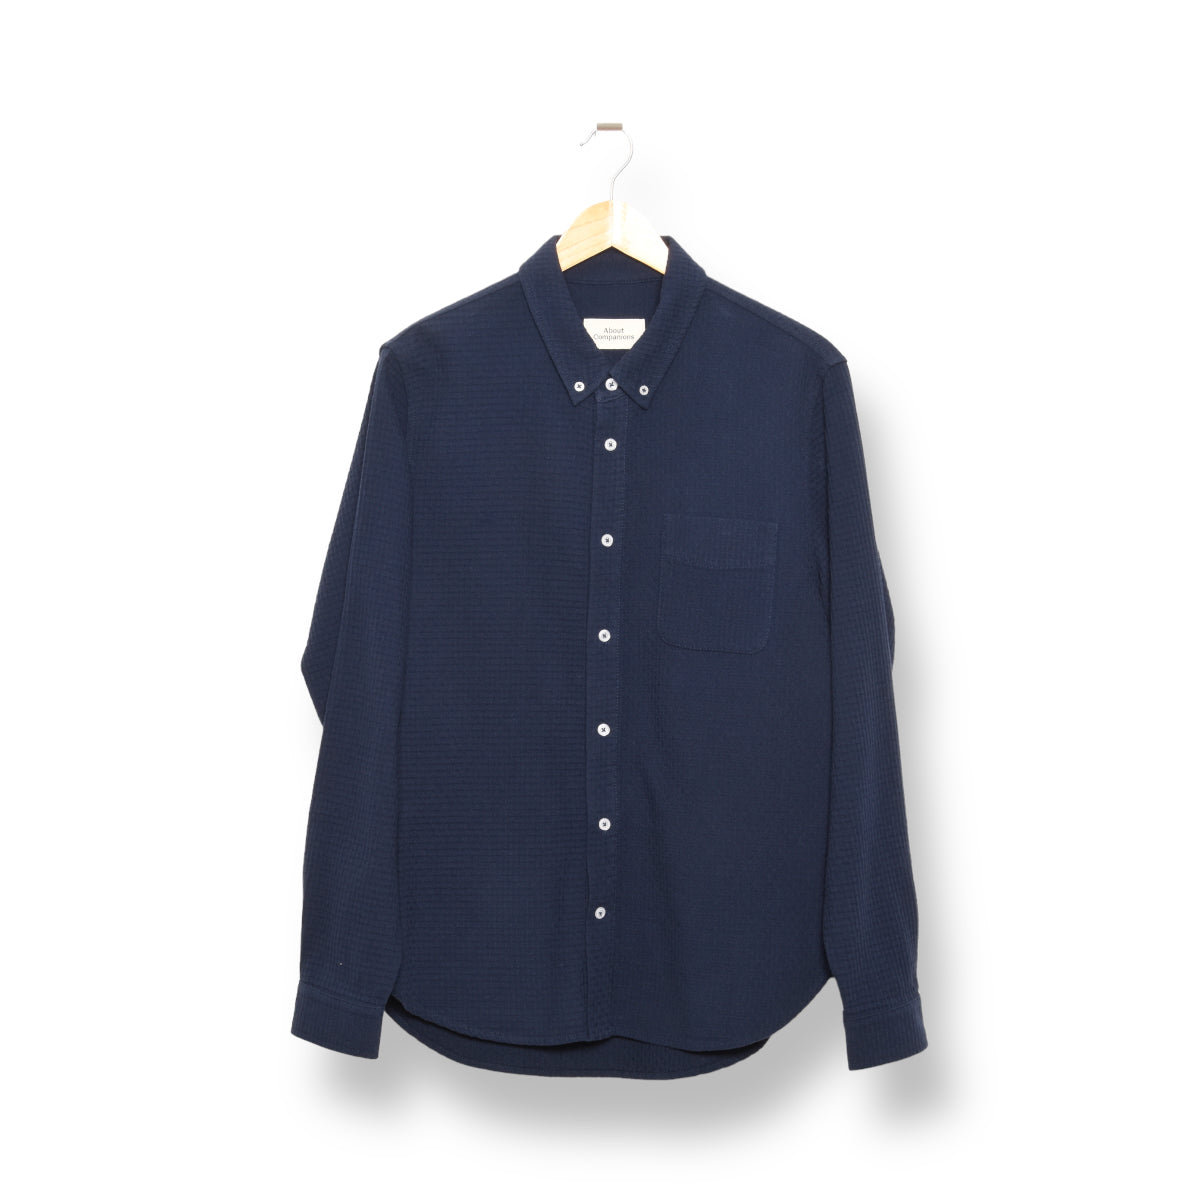 About Companions Ken shirt eco crepe navy